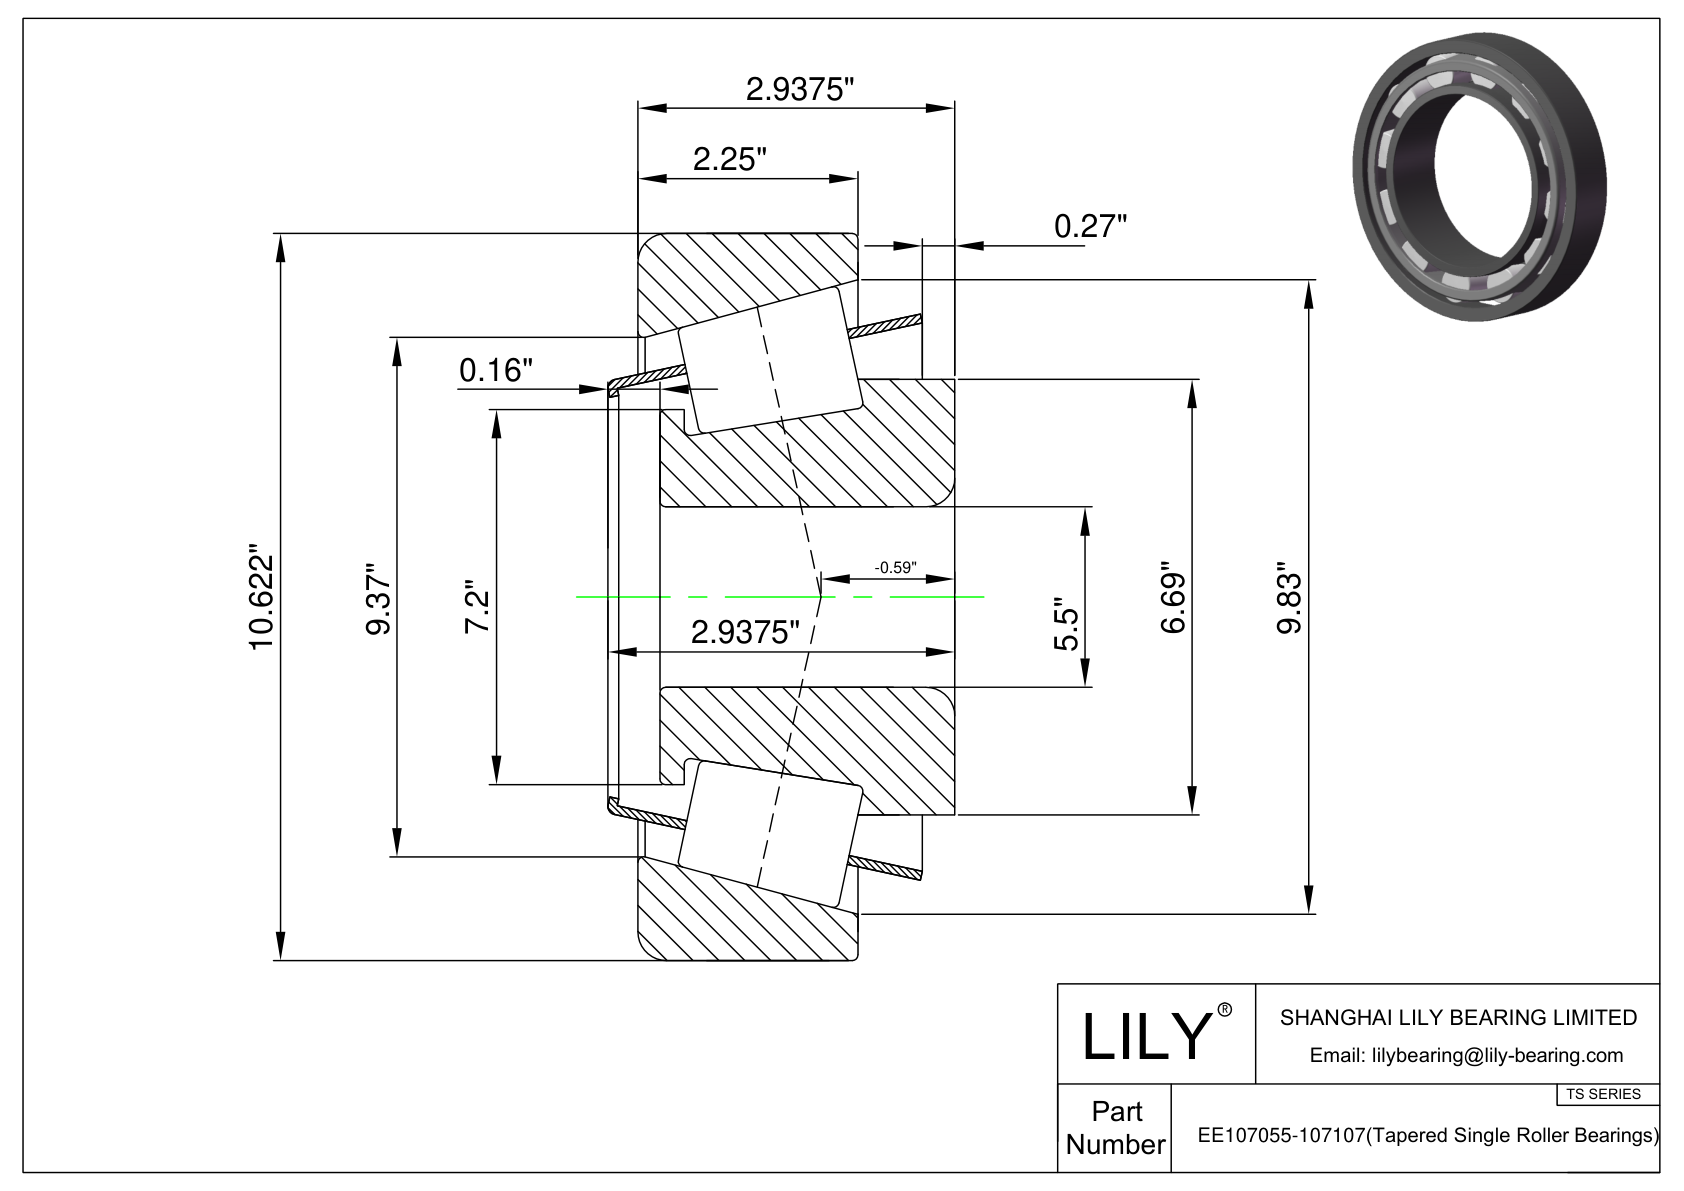 EE107055-107107 TS (Tapered Single Roller Bearings) (Imperial) cad drawing